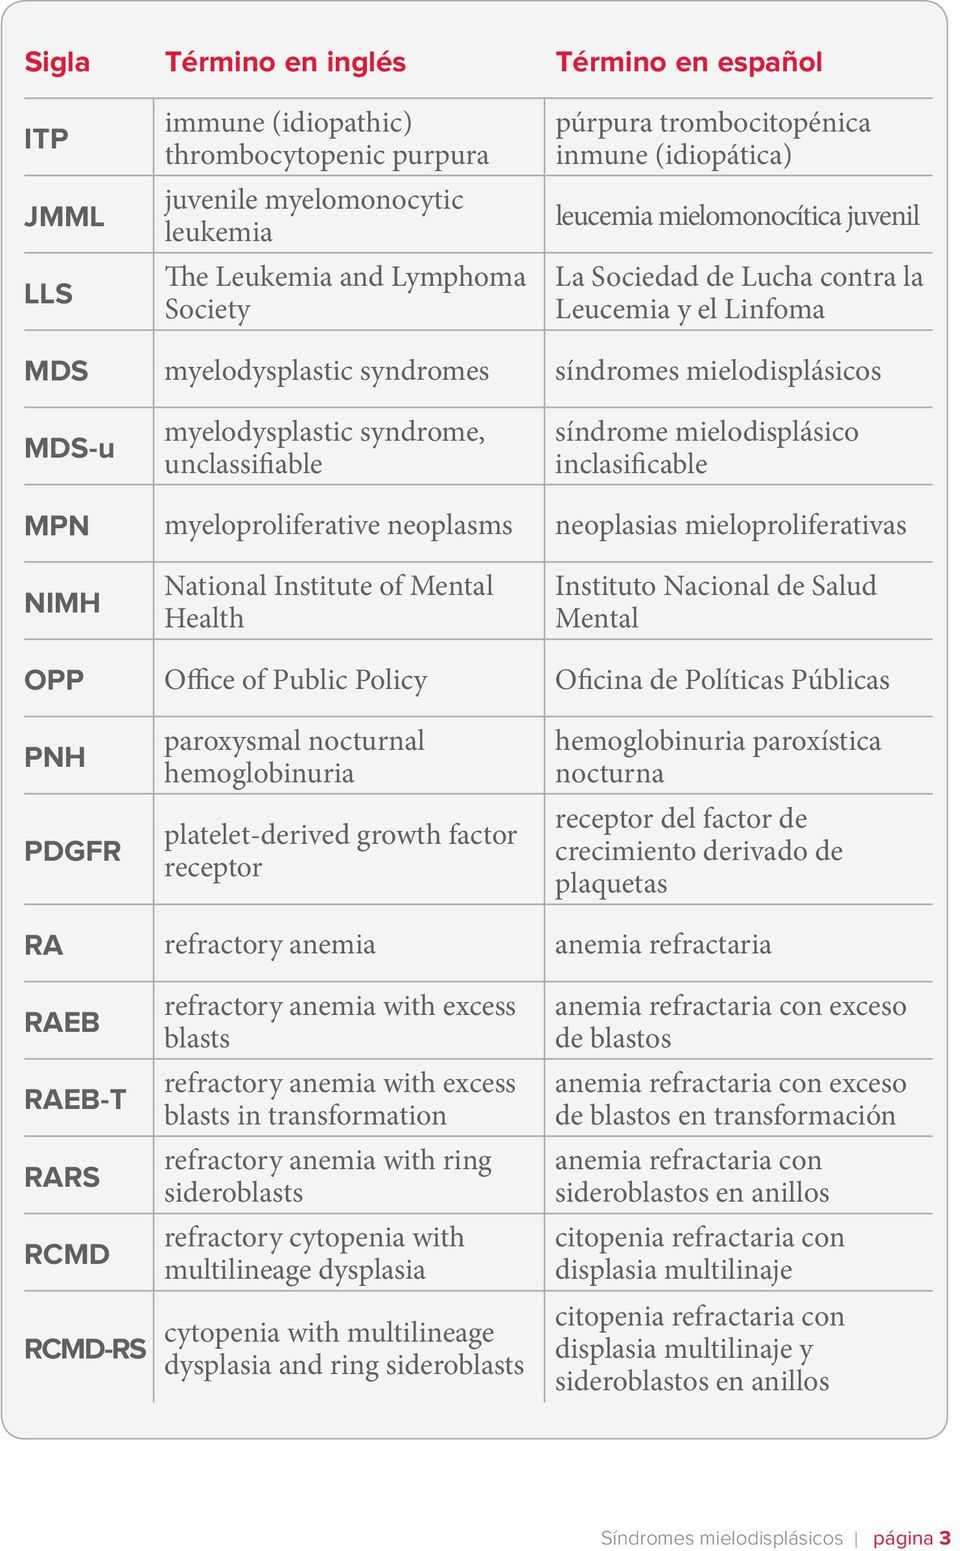 unclassifiable síndrome mielodisplásico inclasificable MPN myeloproliferative neoplasms neoplasias mieloproliferativas NIMH National Institute of Mental Health Instituto Nacional de Salud Mental OPP